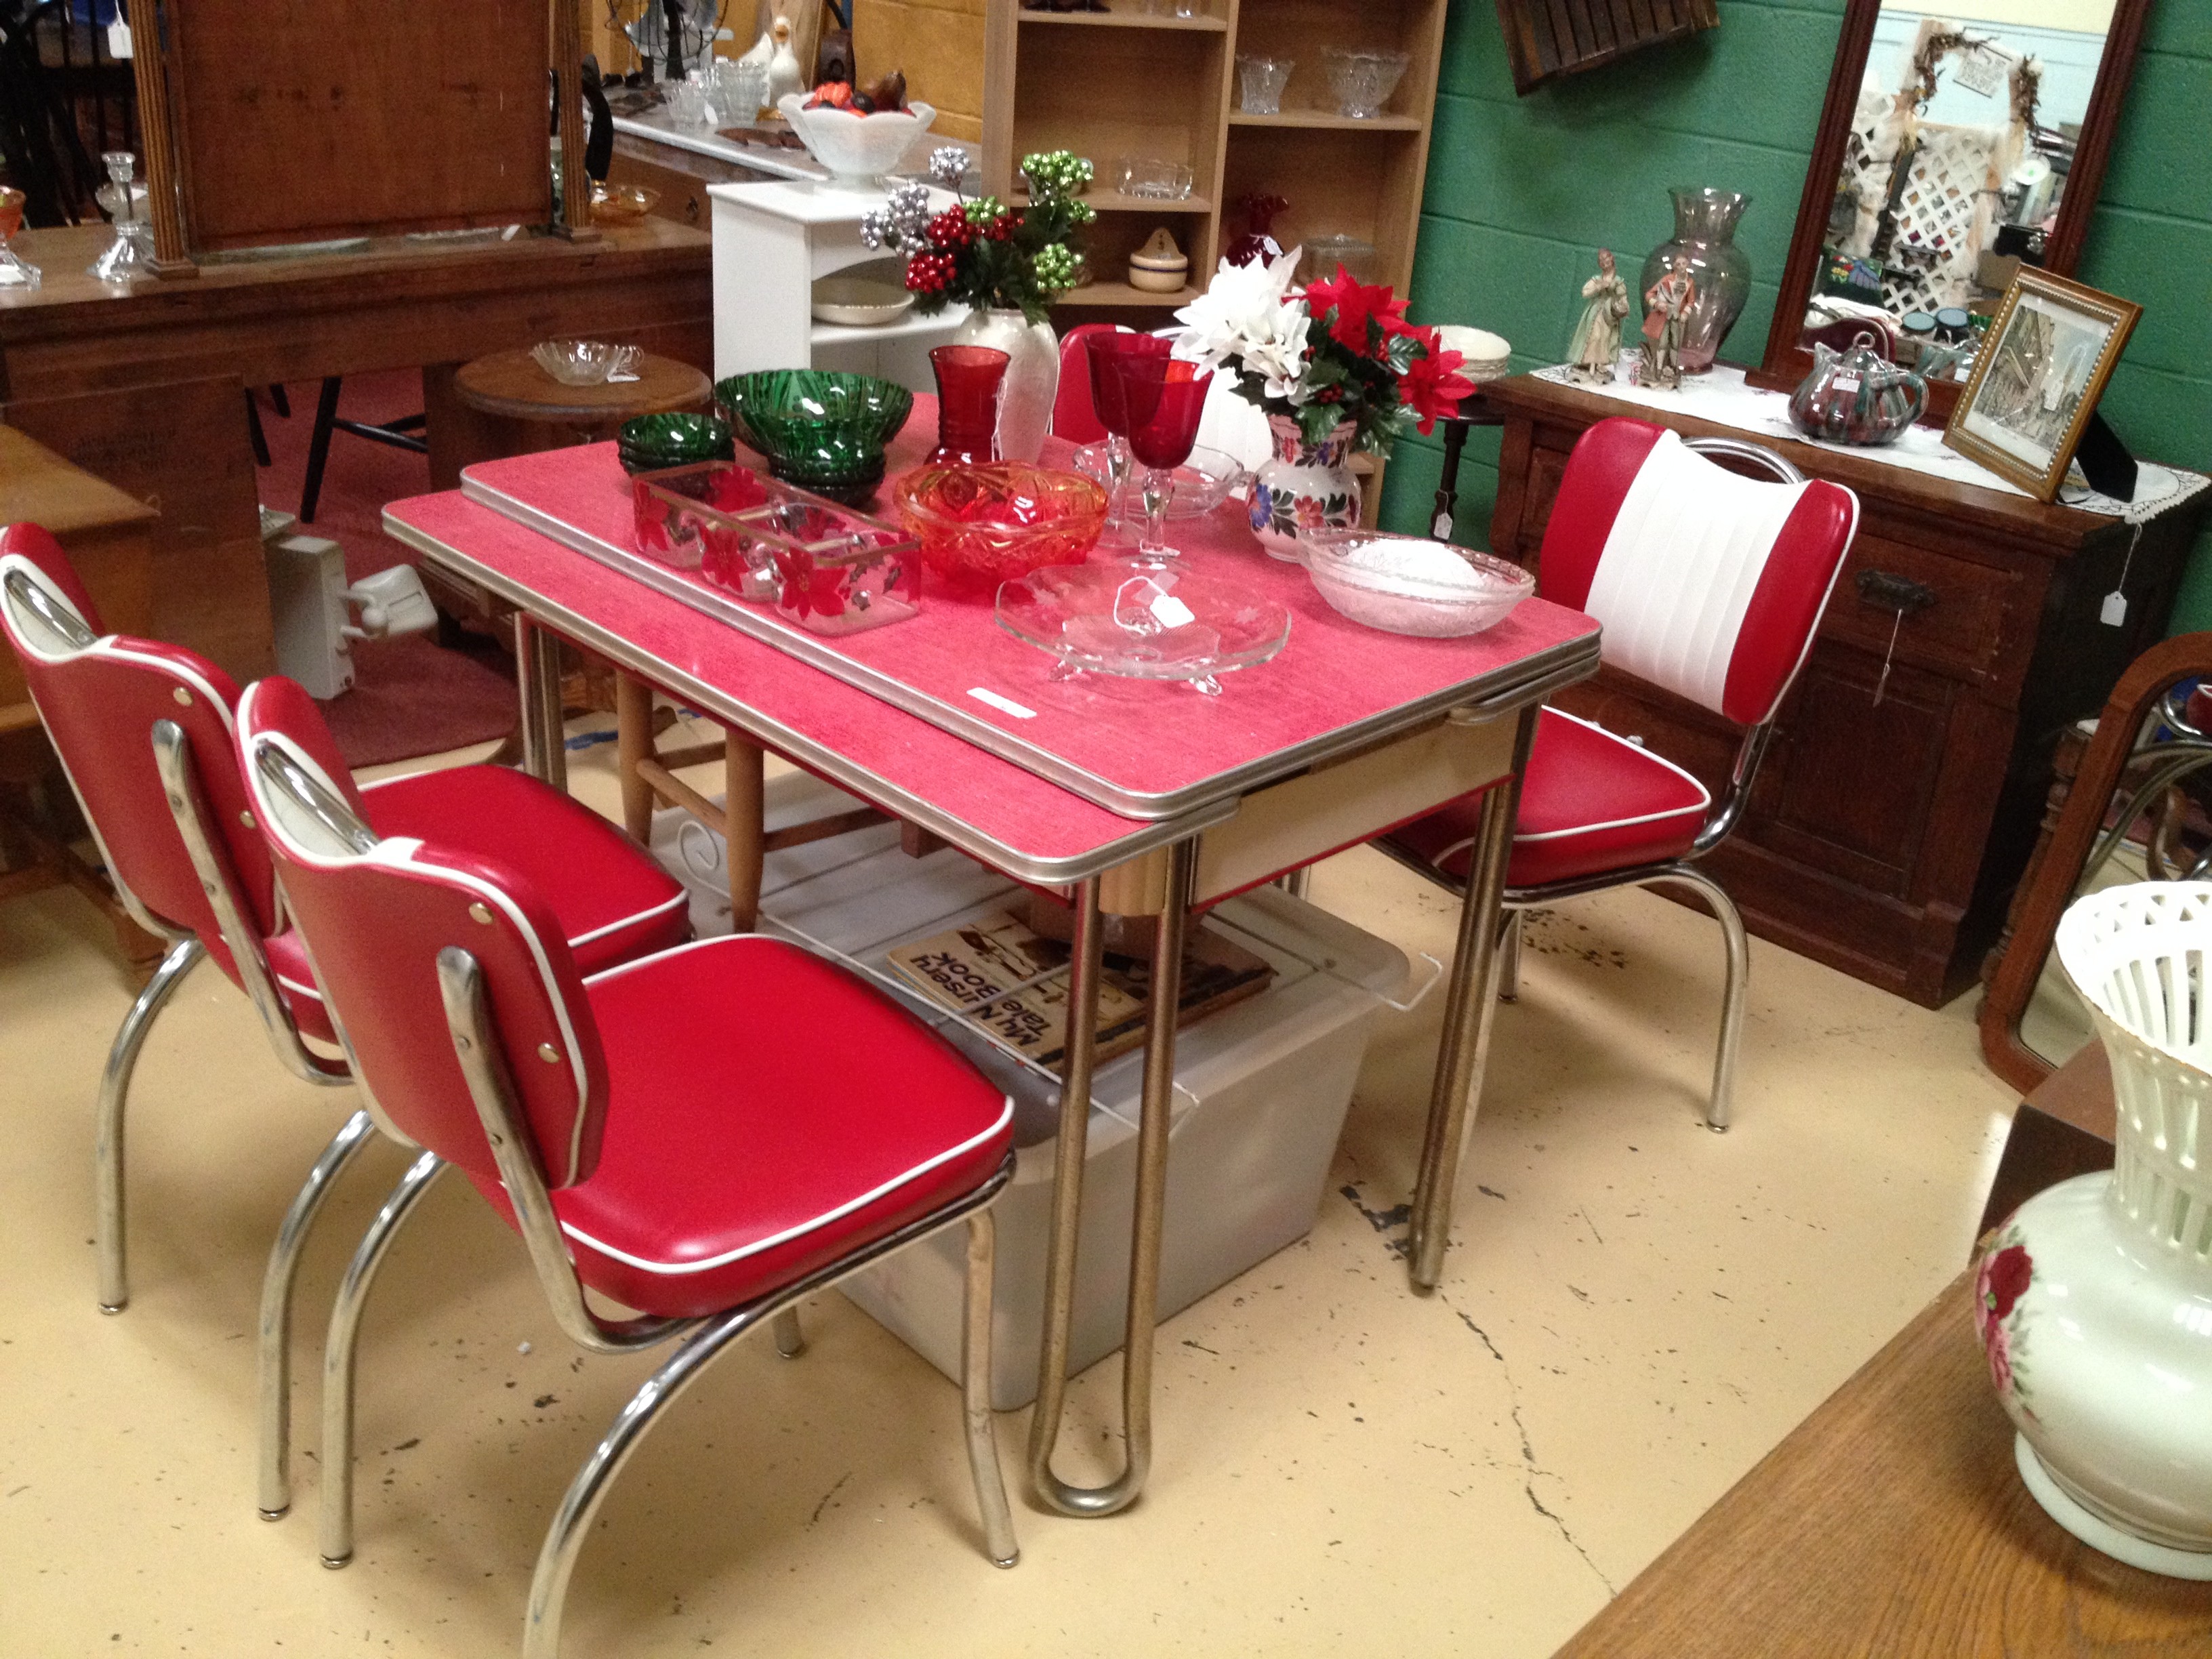 old kitchen table and chairs photo - 10